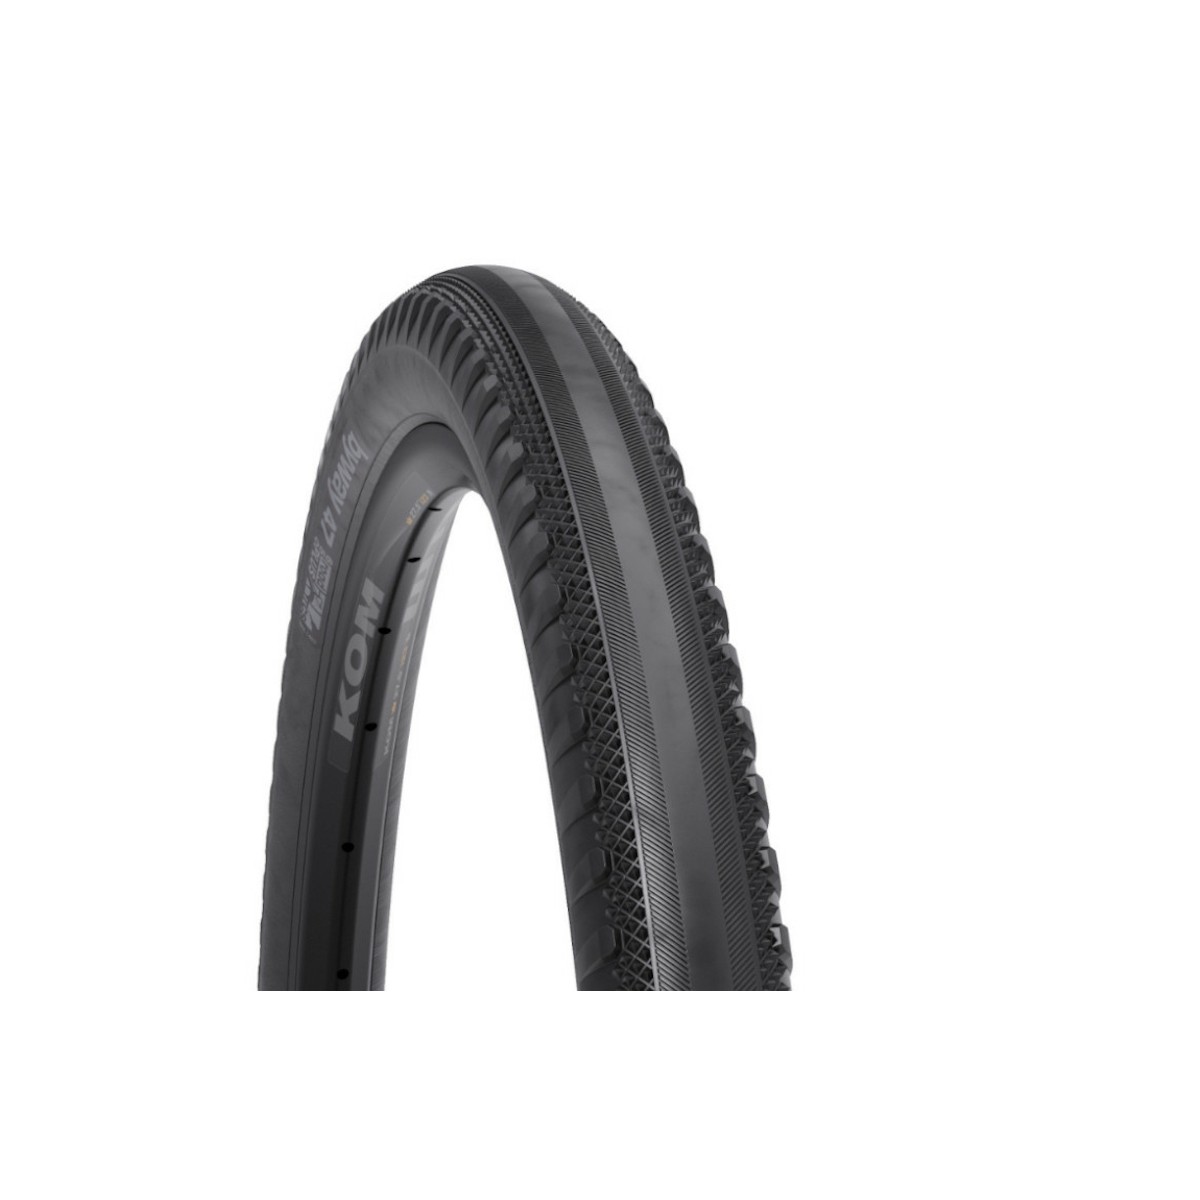 WTB BYWAY ROAD TCS LIGHT FAST ROLLING 700 X 40 tubeless tyre